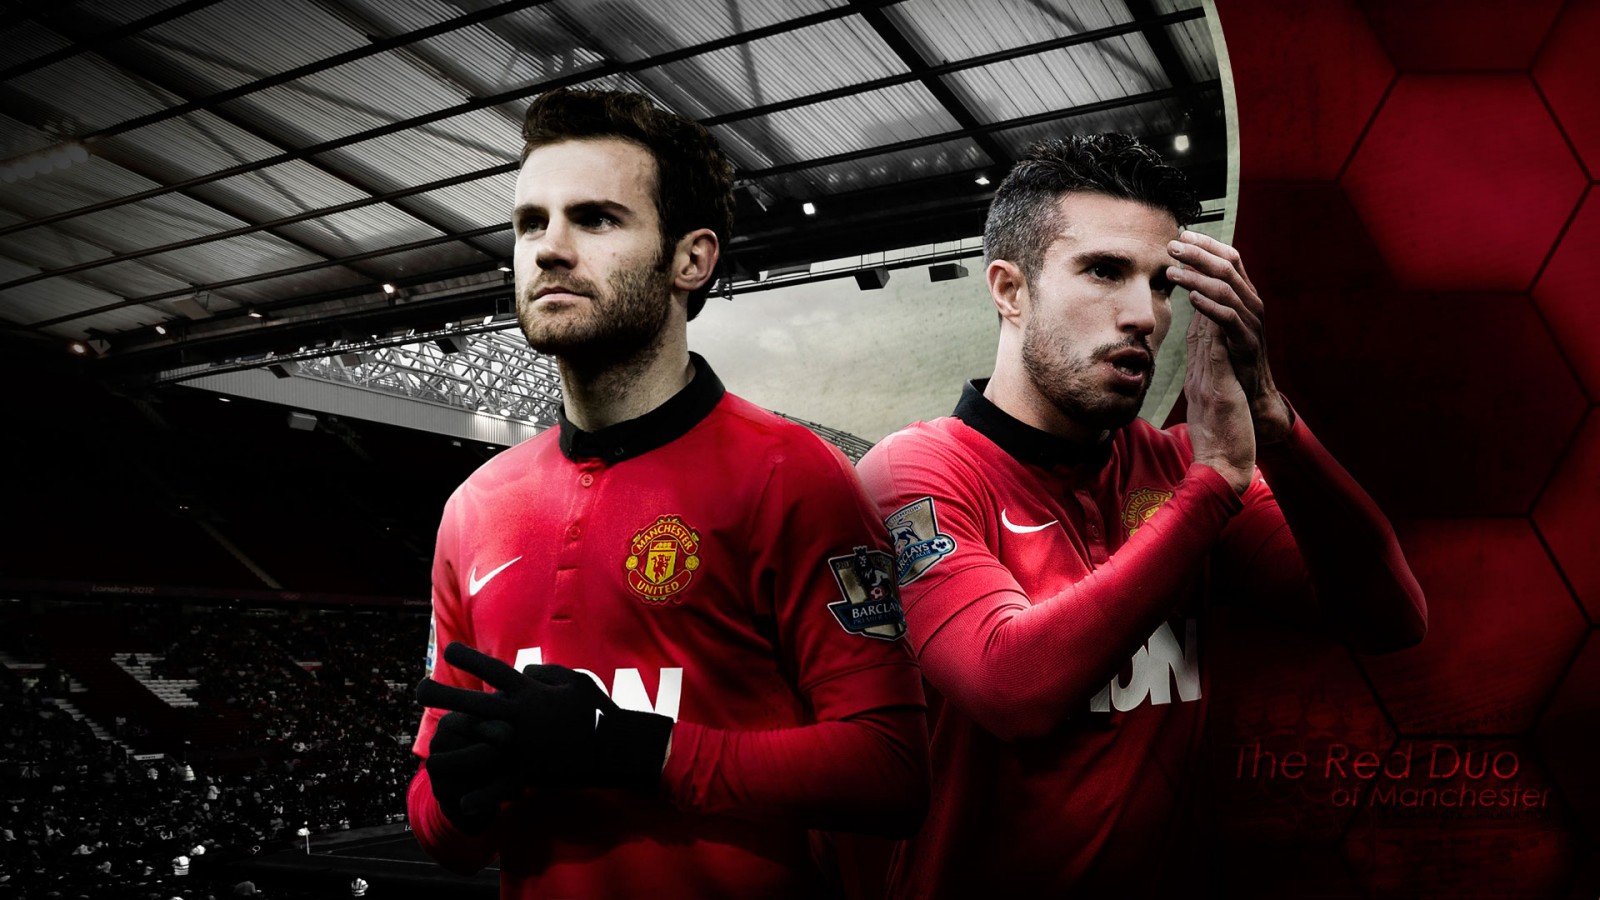 Image for wallpaper manchester united 2014 2015 wallpaper download 1600x900